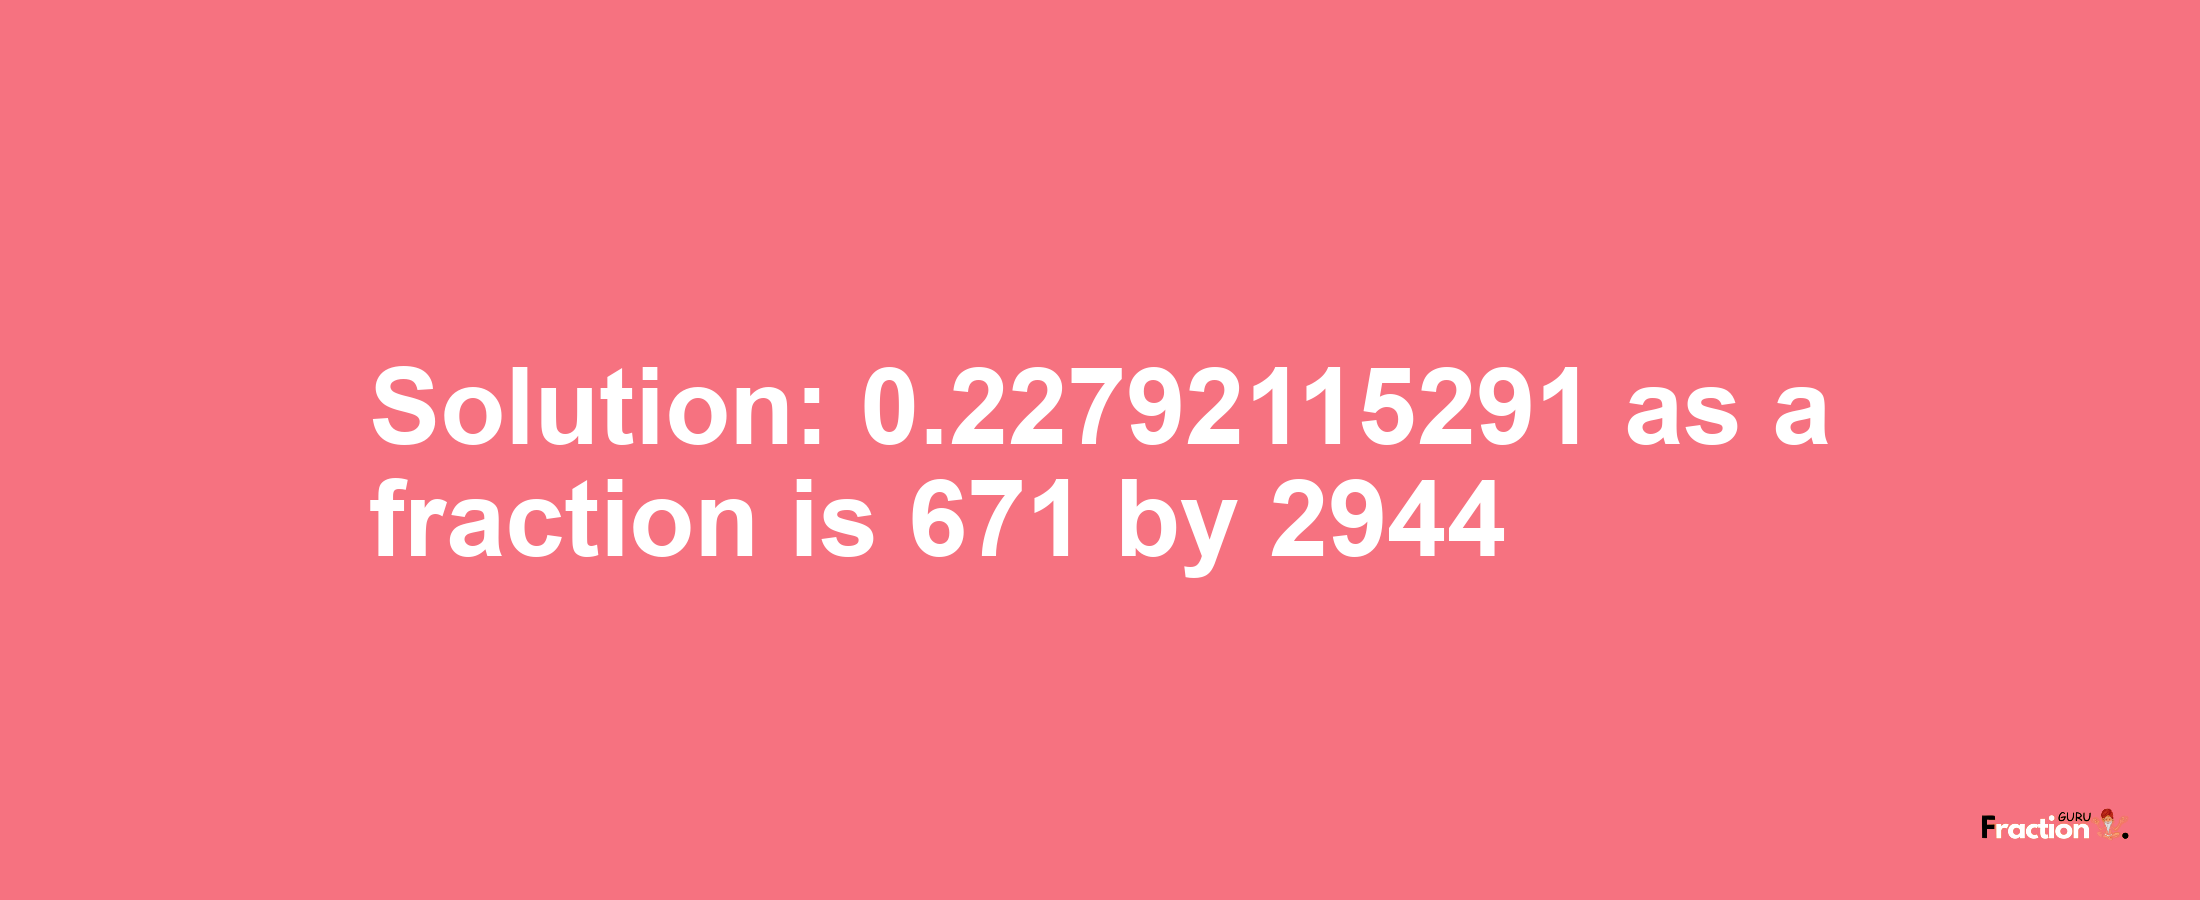 Solution:0.22792115291 as a fraction is 671/2944